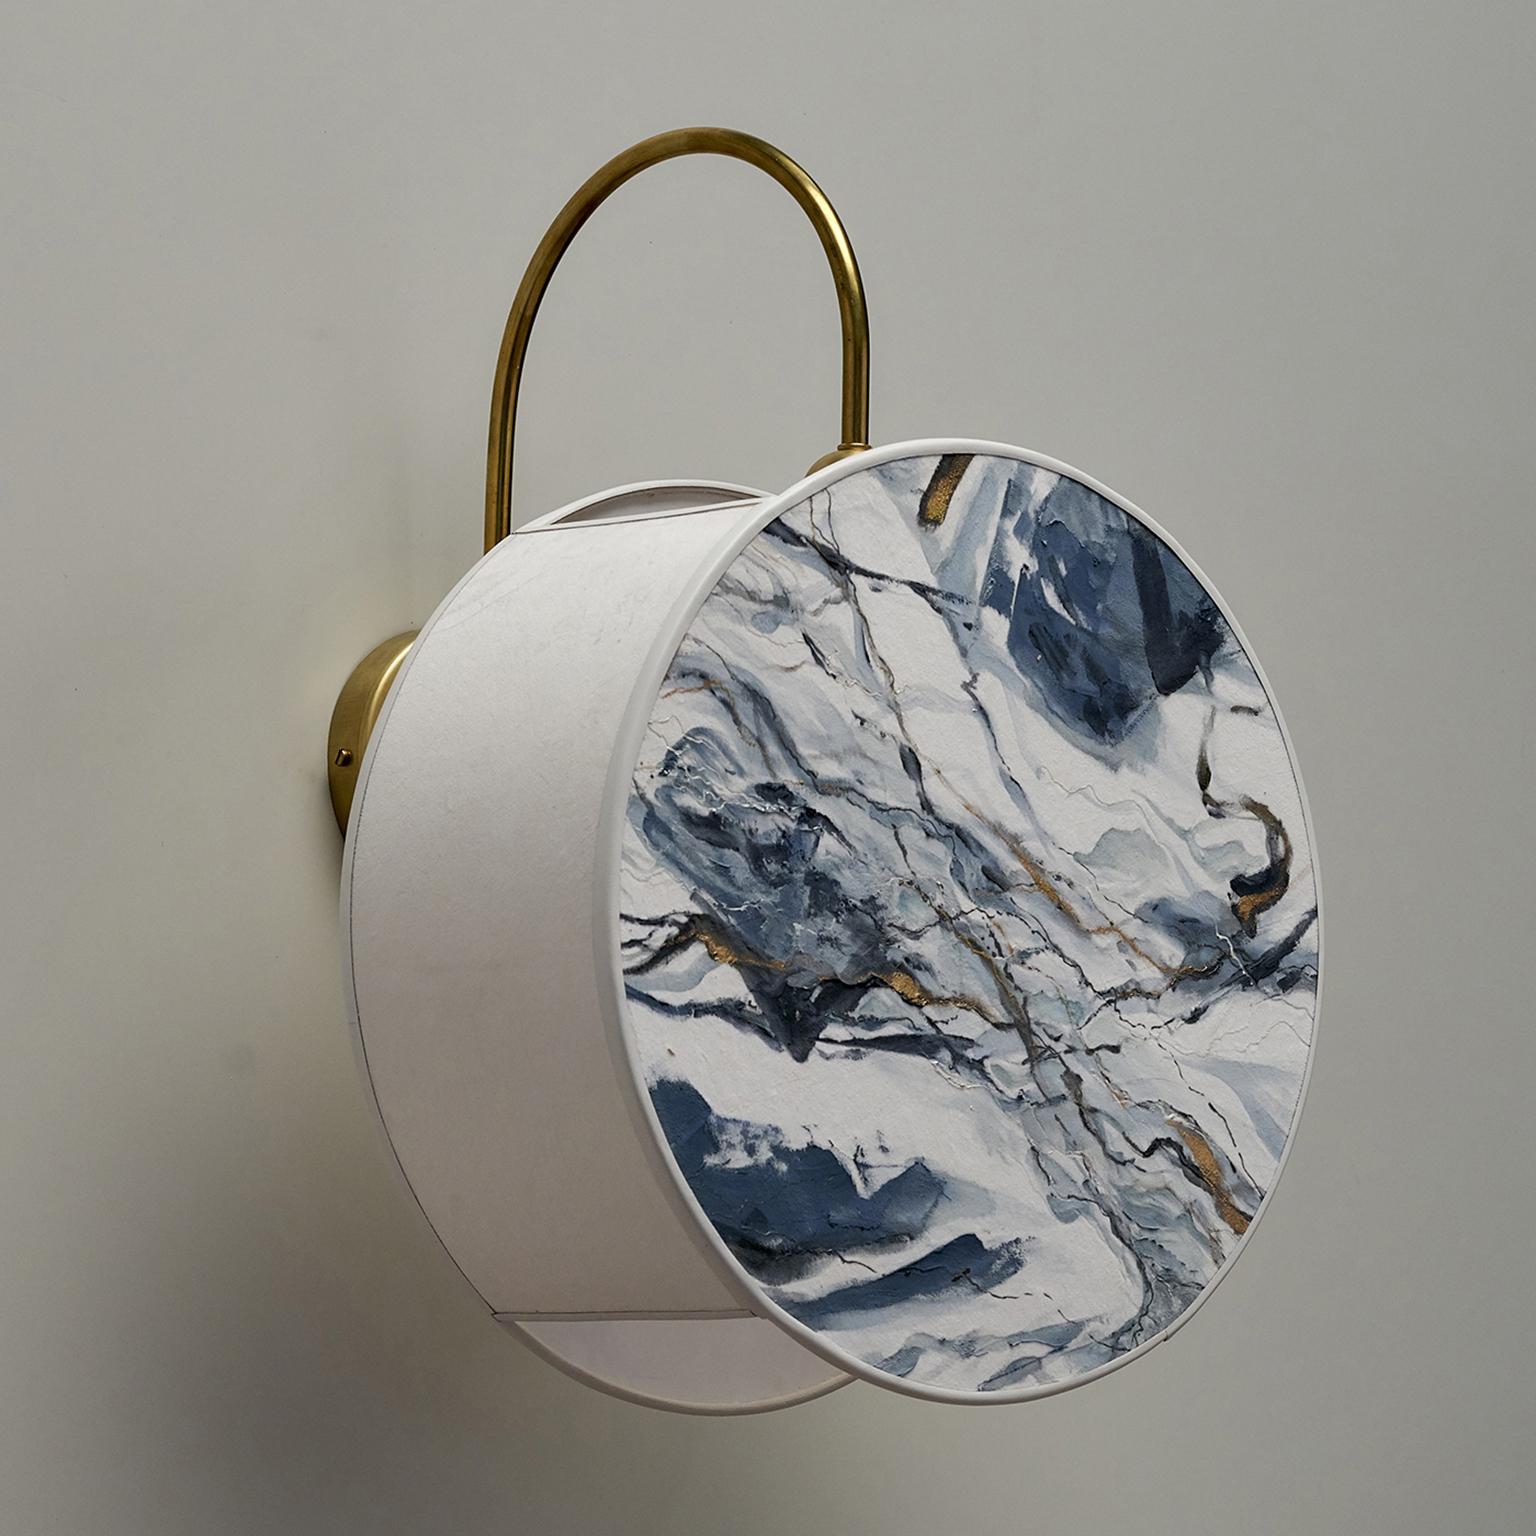 Denim Pattern Sconce Lamps Handmade Painting Velvet and Natural Brass Blue Color In New Condition For Sale In Campolongo Maggiore, IT